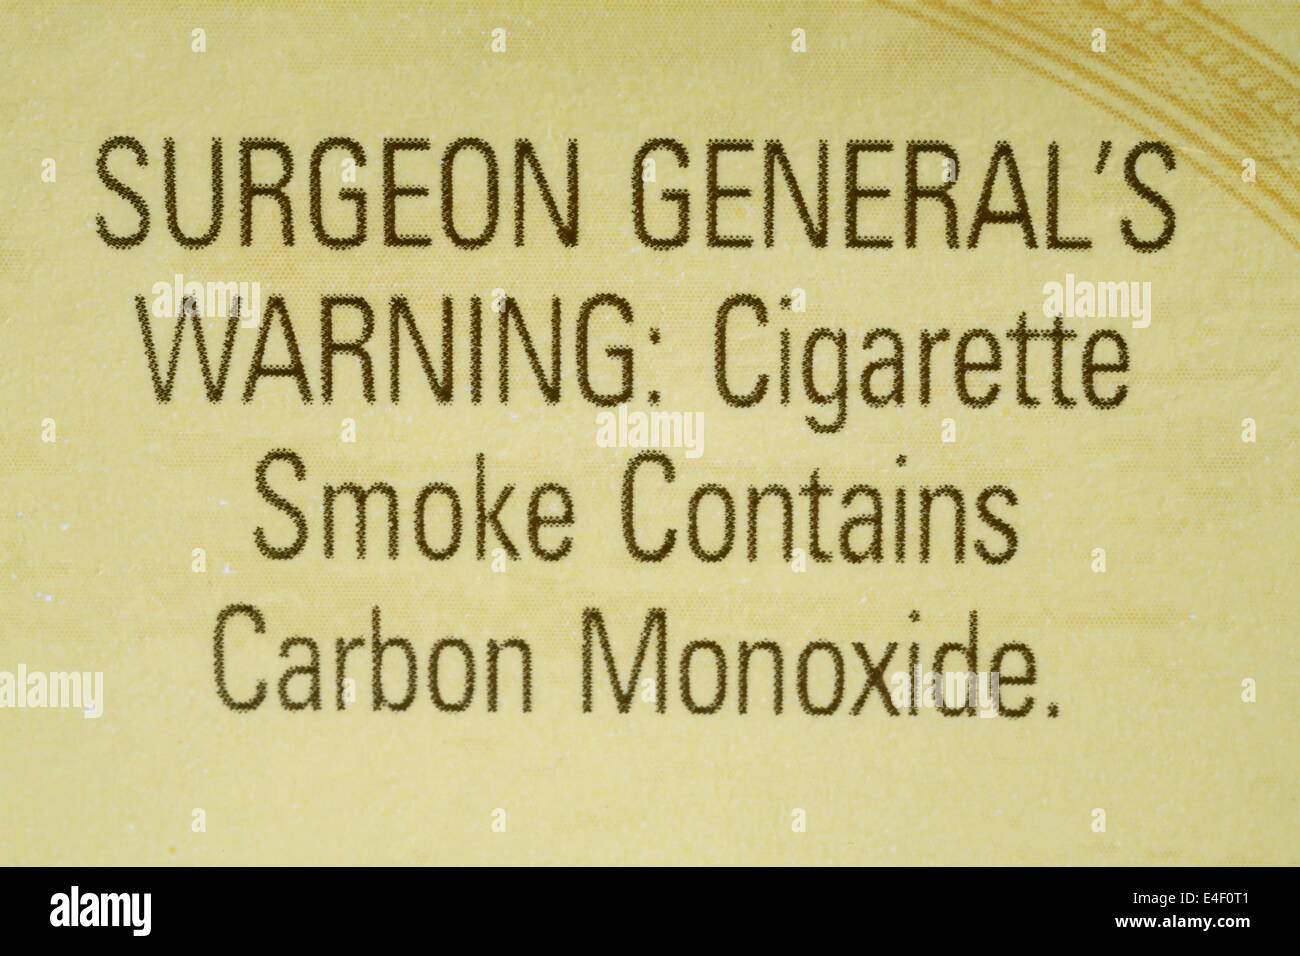 Surgeon General's Warning on pack of Camel Cigarettes Stock Photo